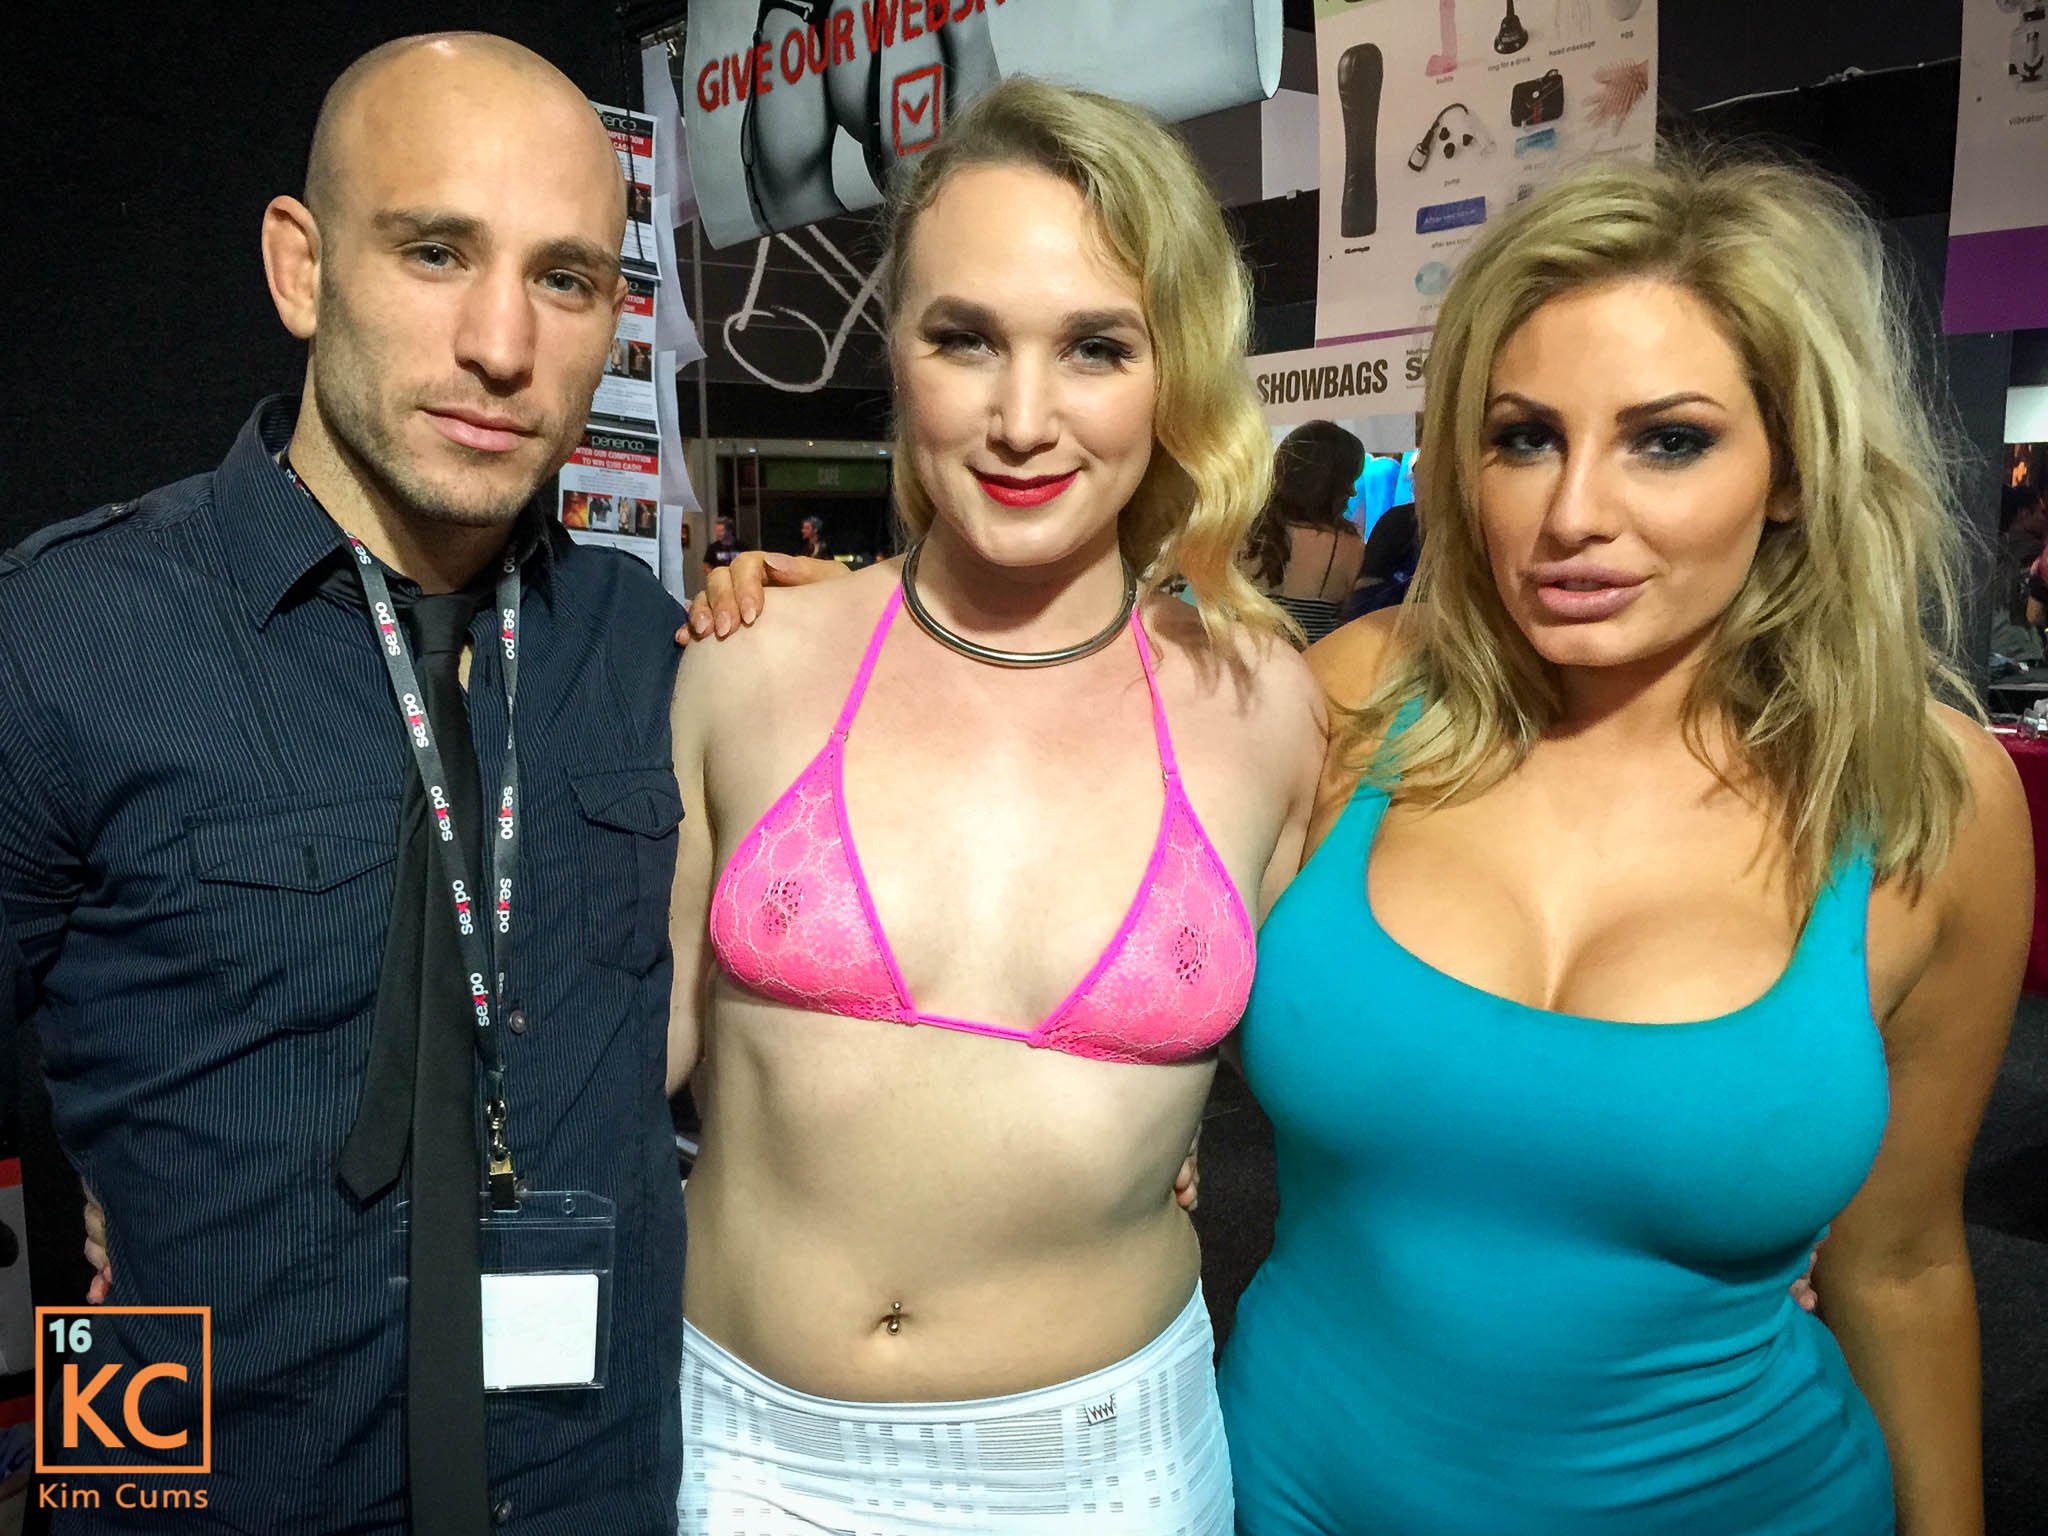 Kim Cums: Sexpo with Friends